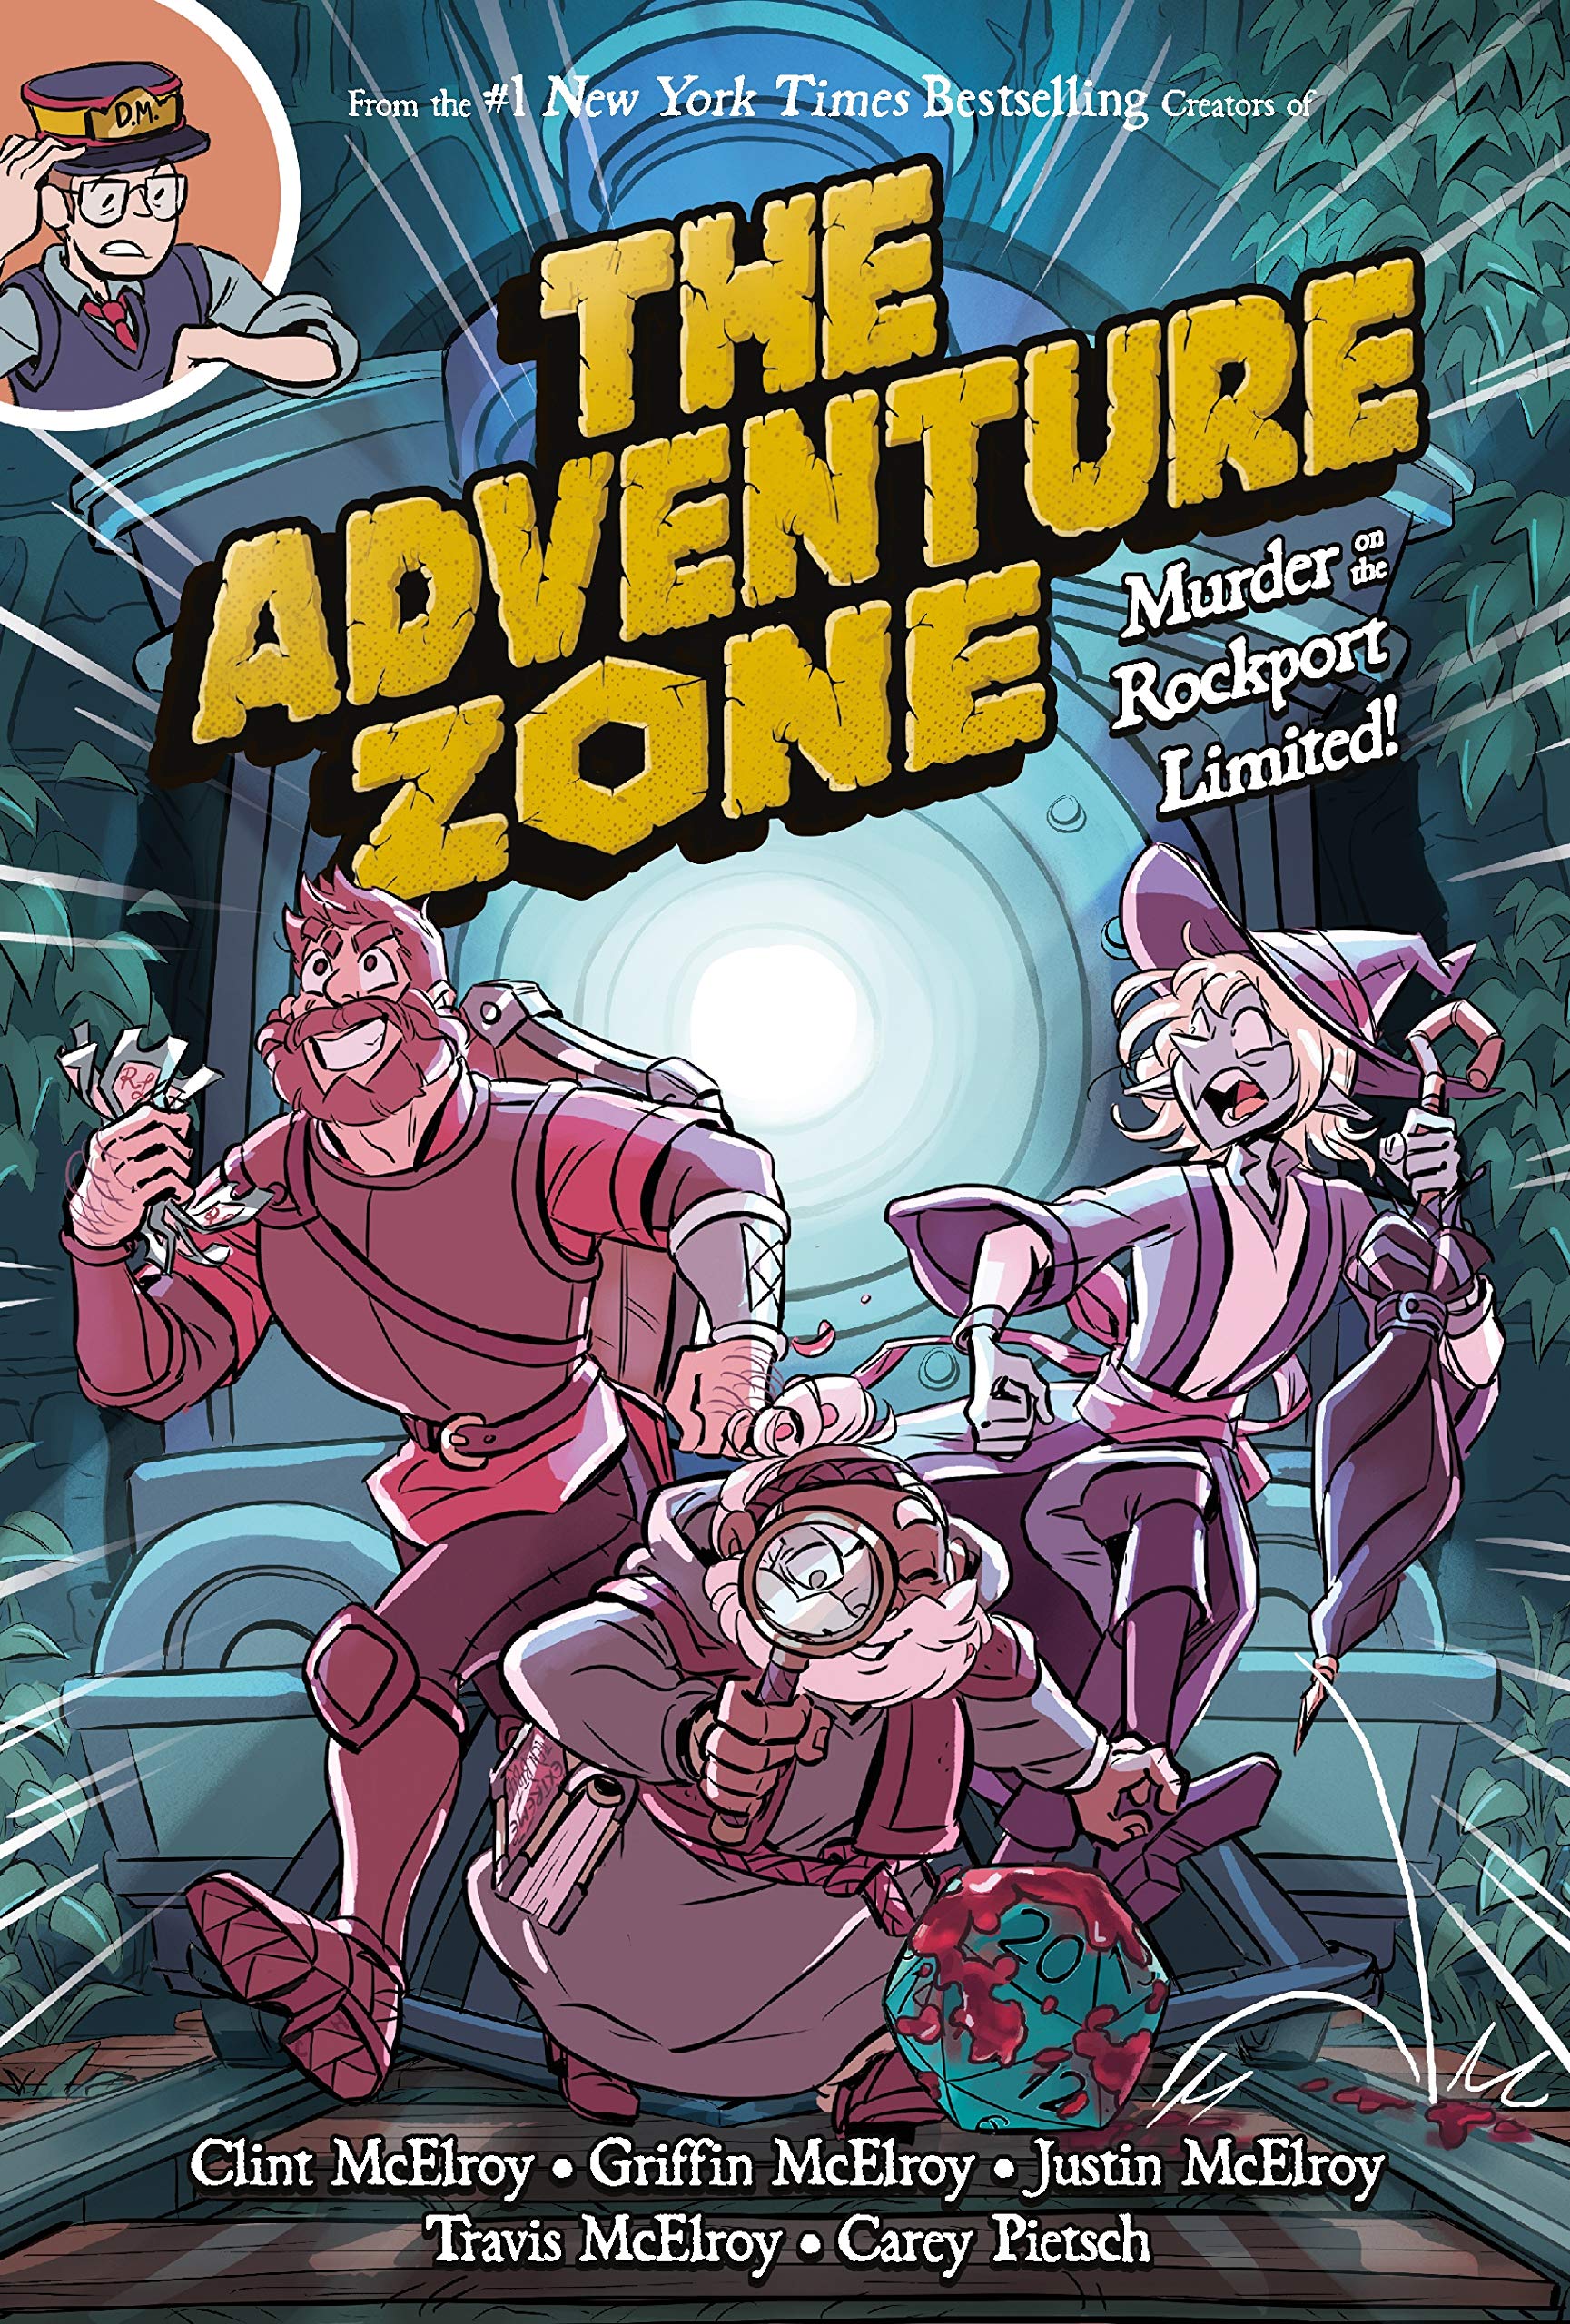 The Adventure Zone: Murder on the Rockport Limited cover art